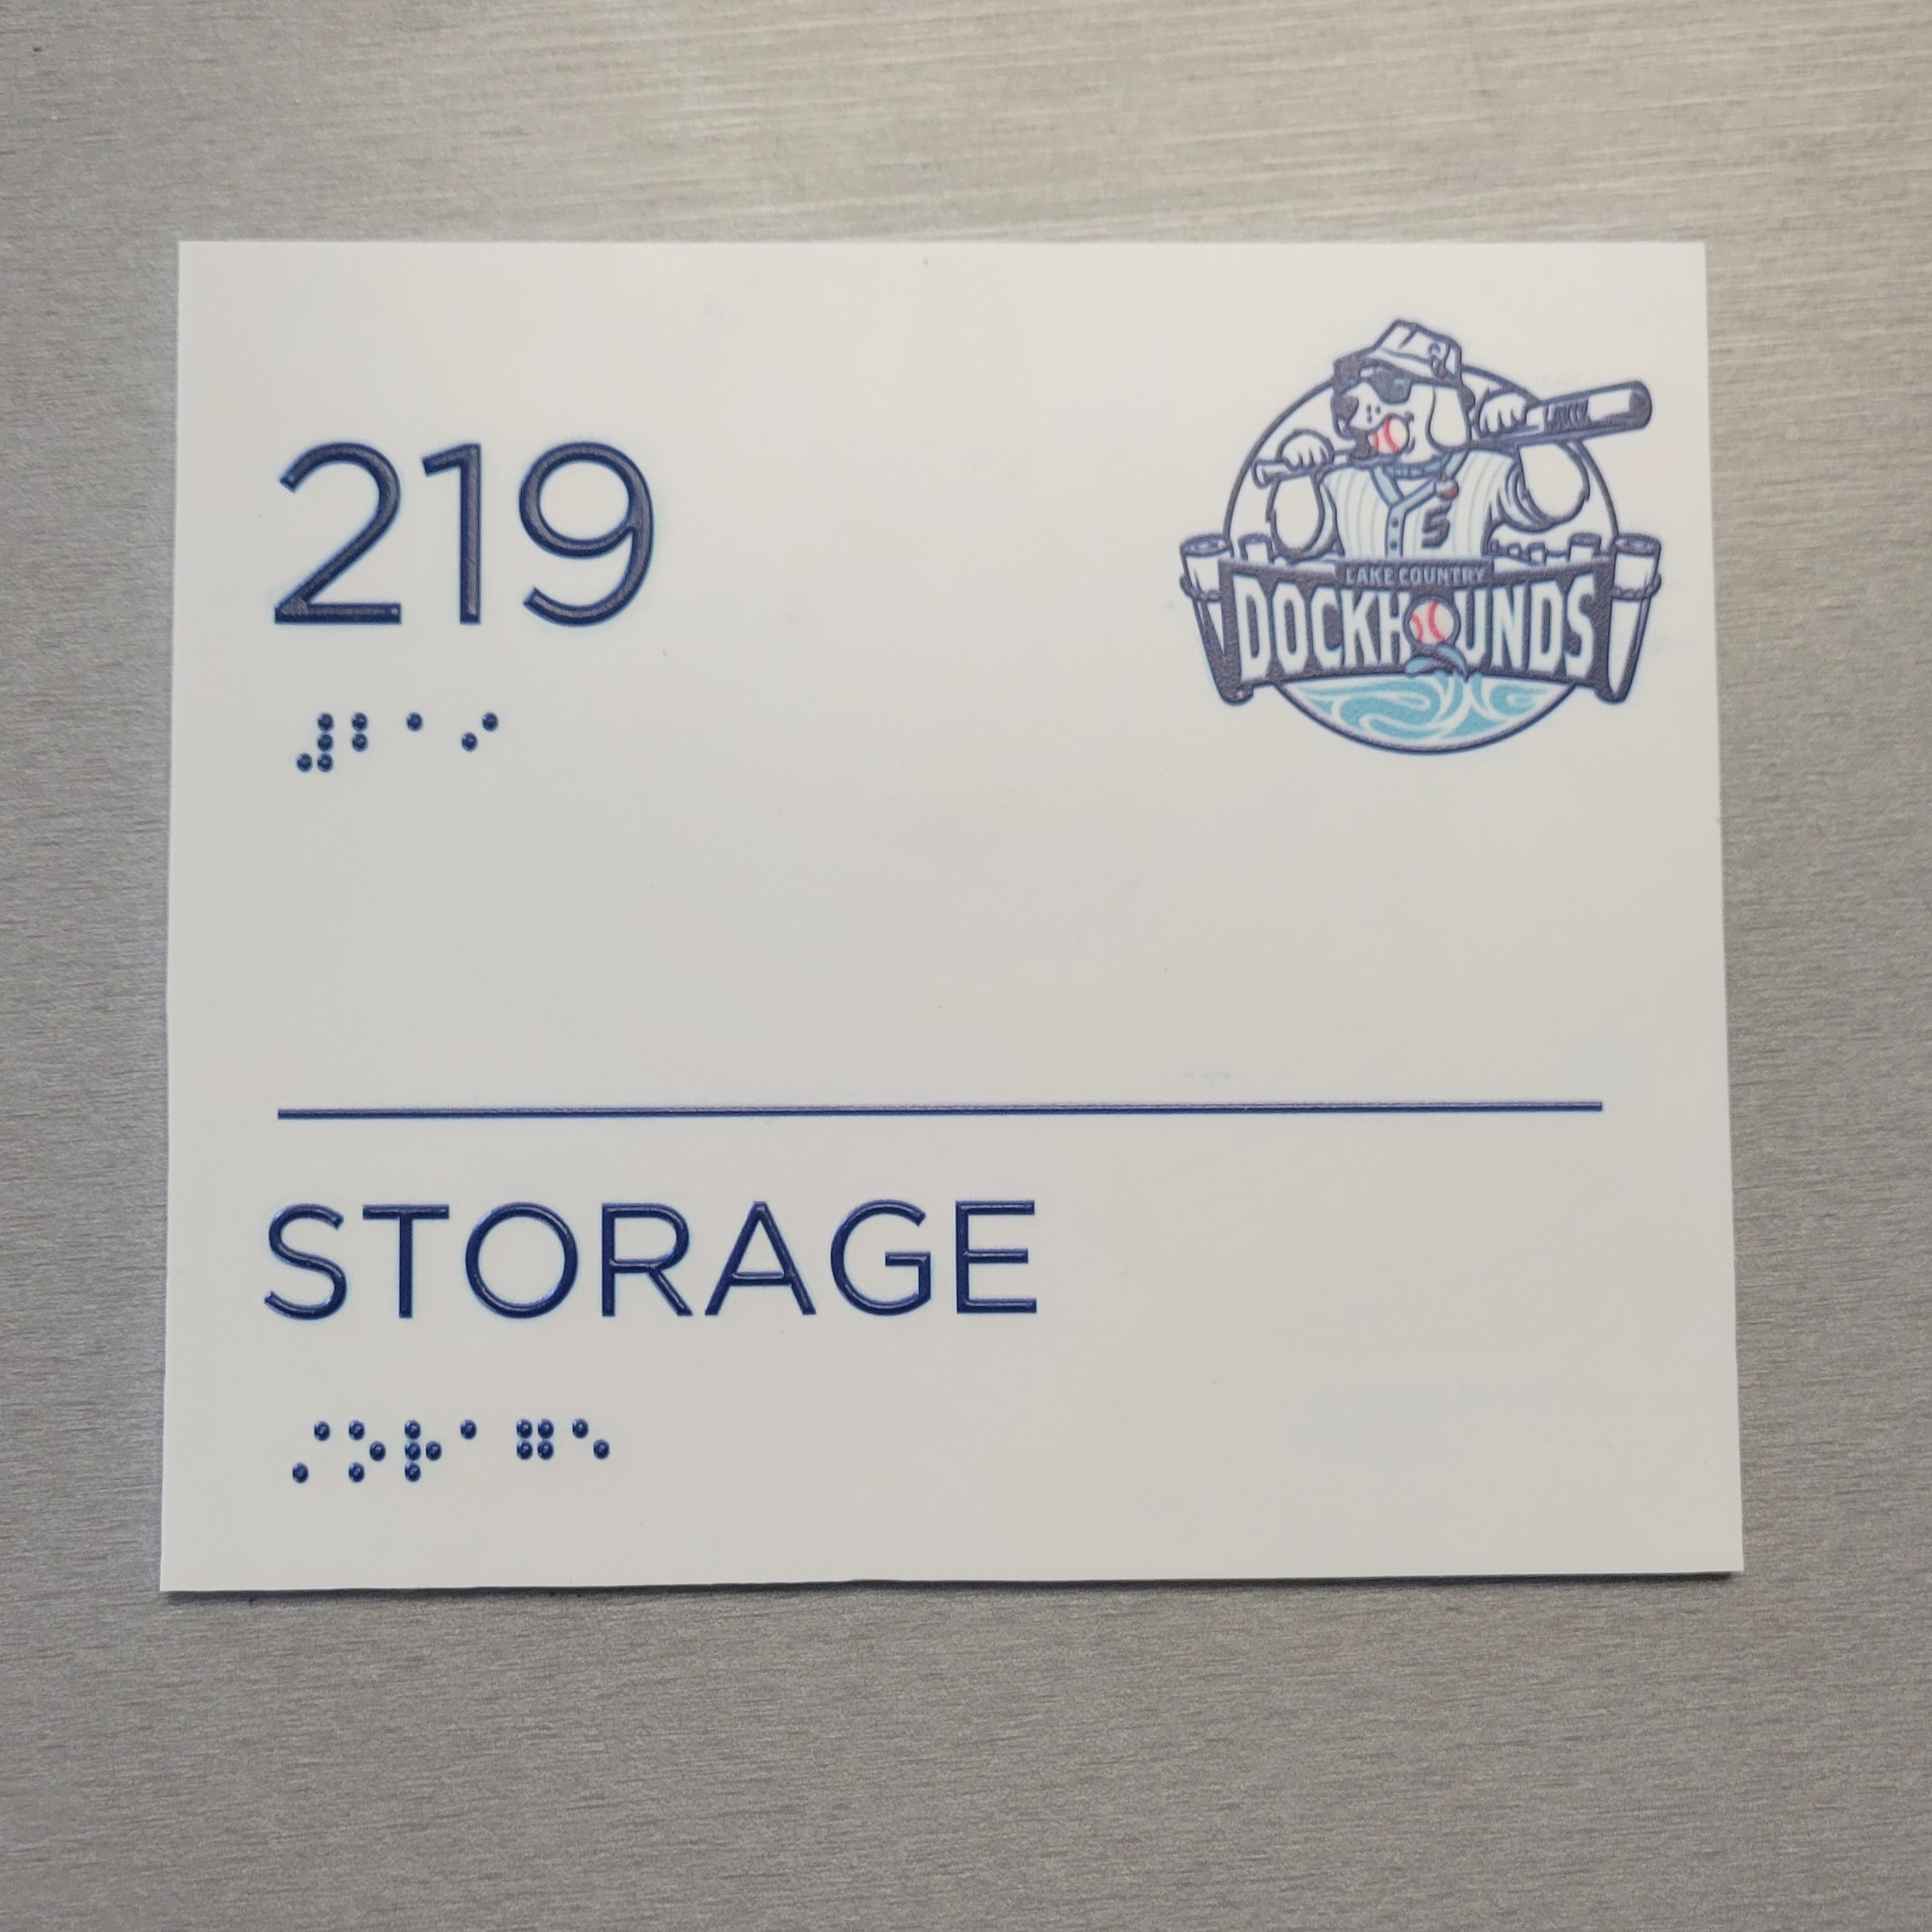 An office plaque with the number 219 and the word "storage" with braille under them. A logo for the Lake Country Dockhounds is featured in the upper right corner.